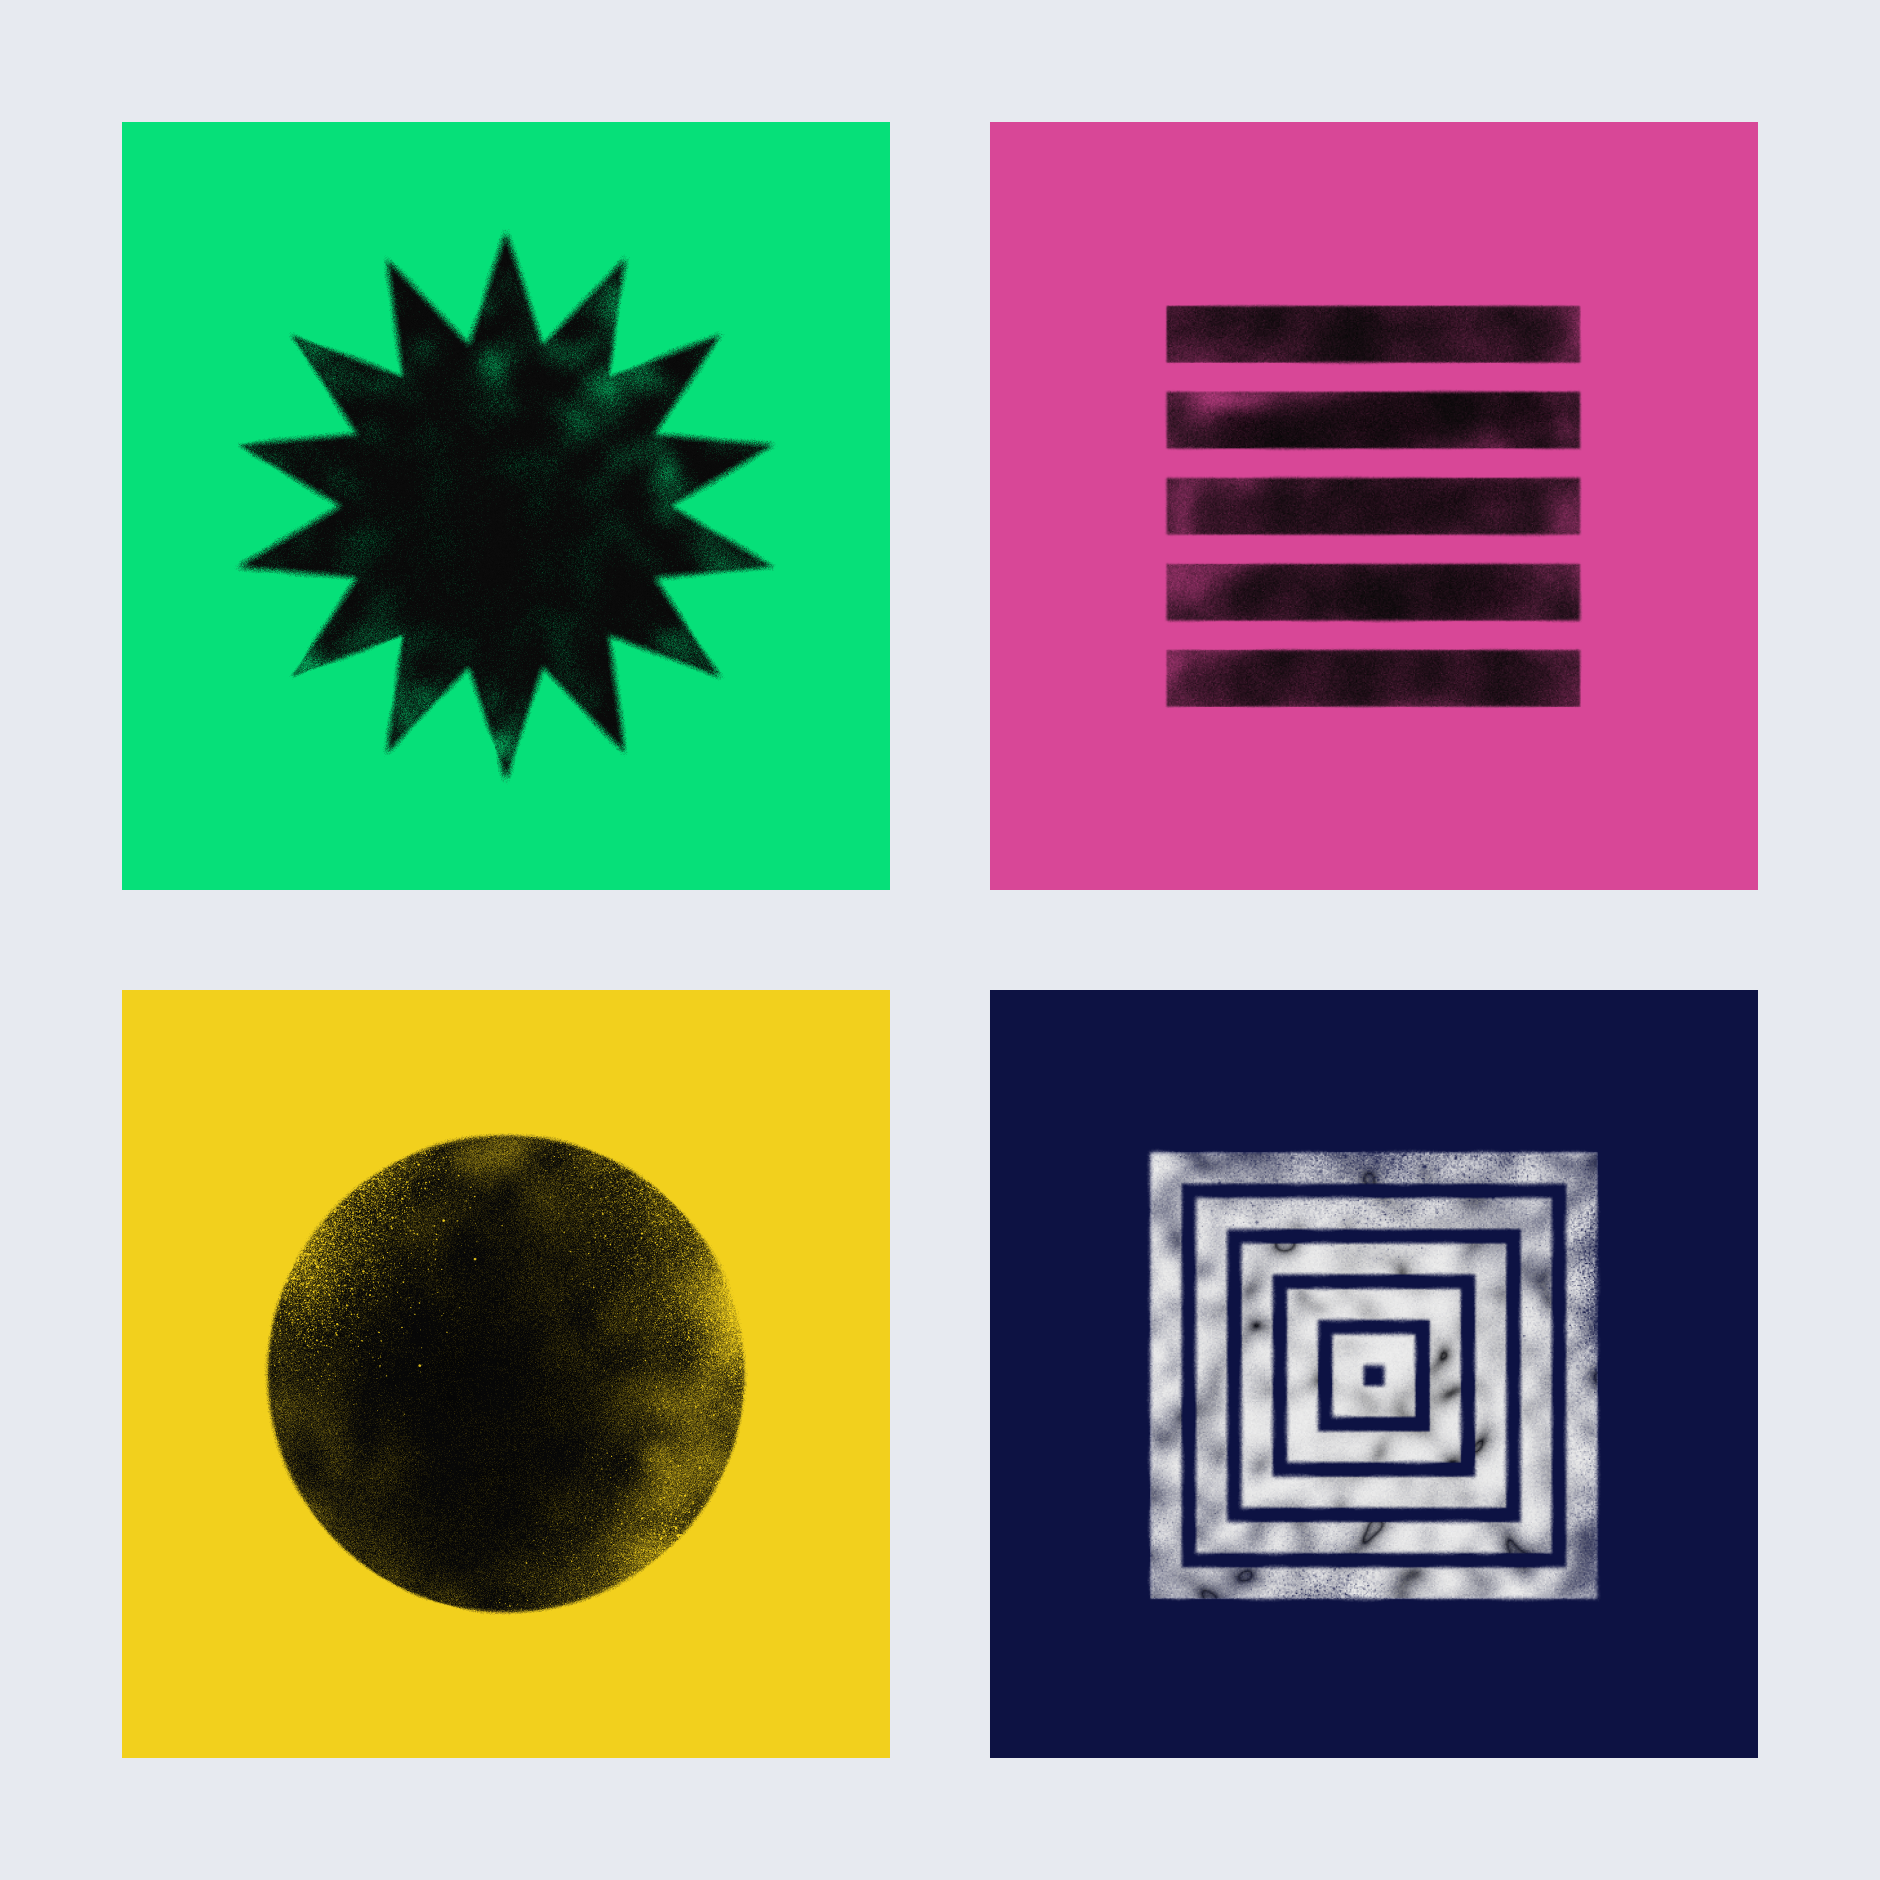 Series of icons in black on green, pink, yellow, and navy backgrounds